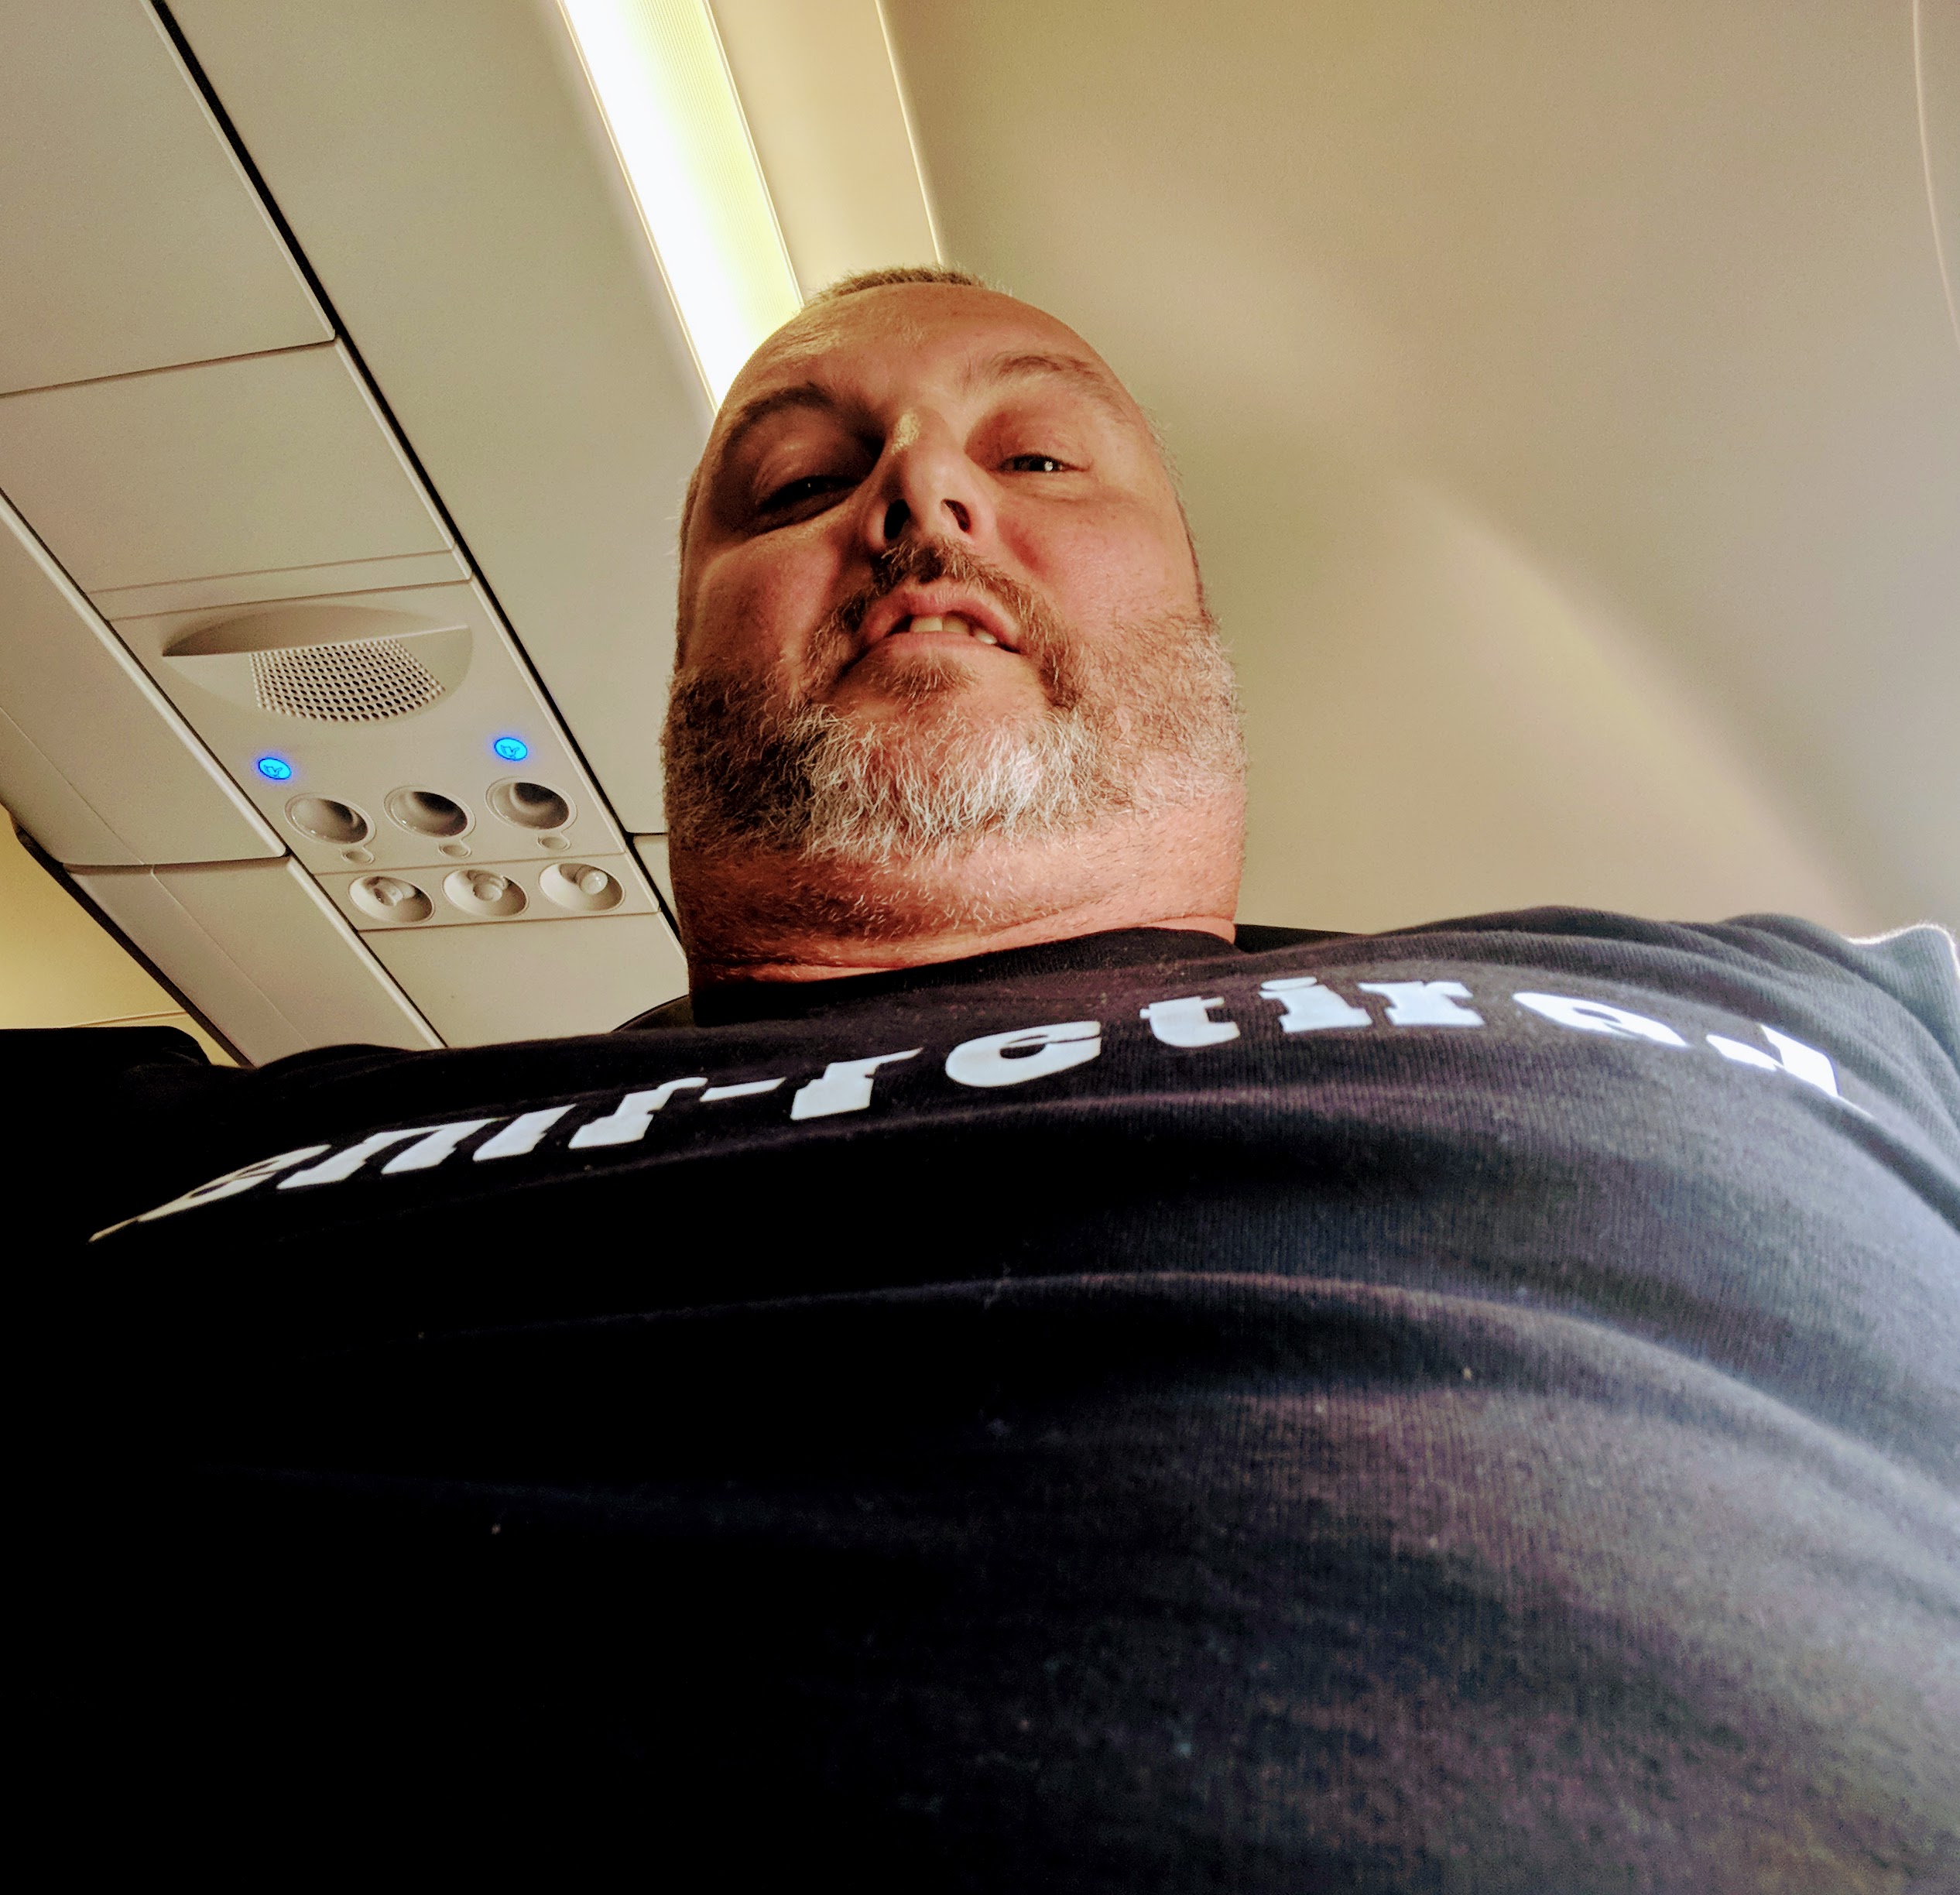 Strange angle of man in a t-shirt